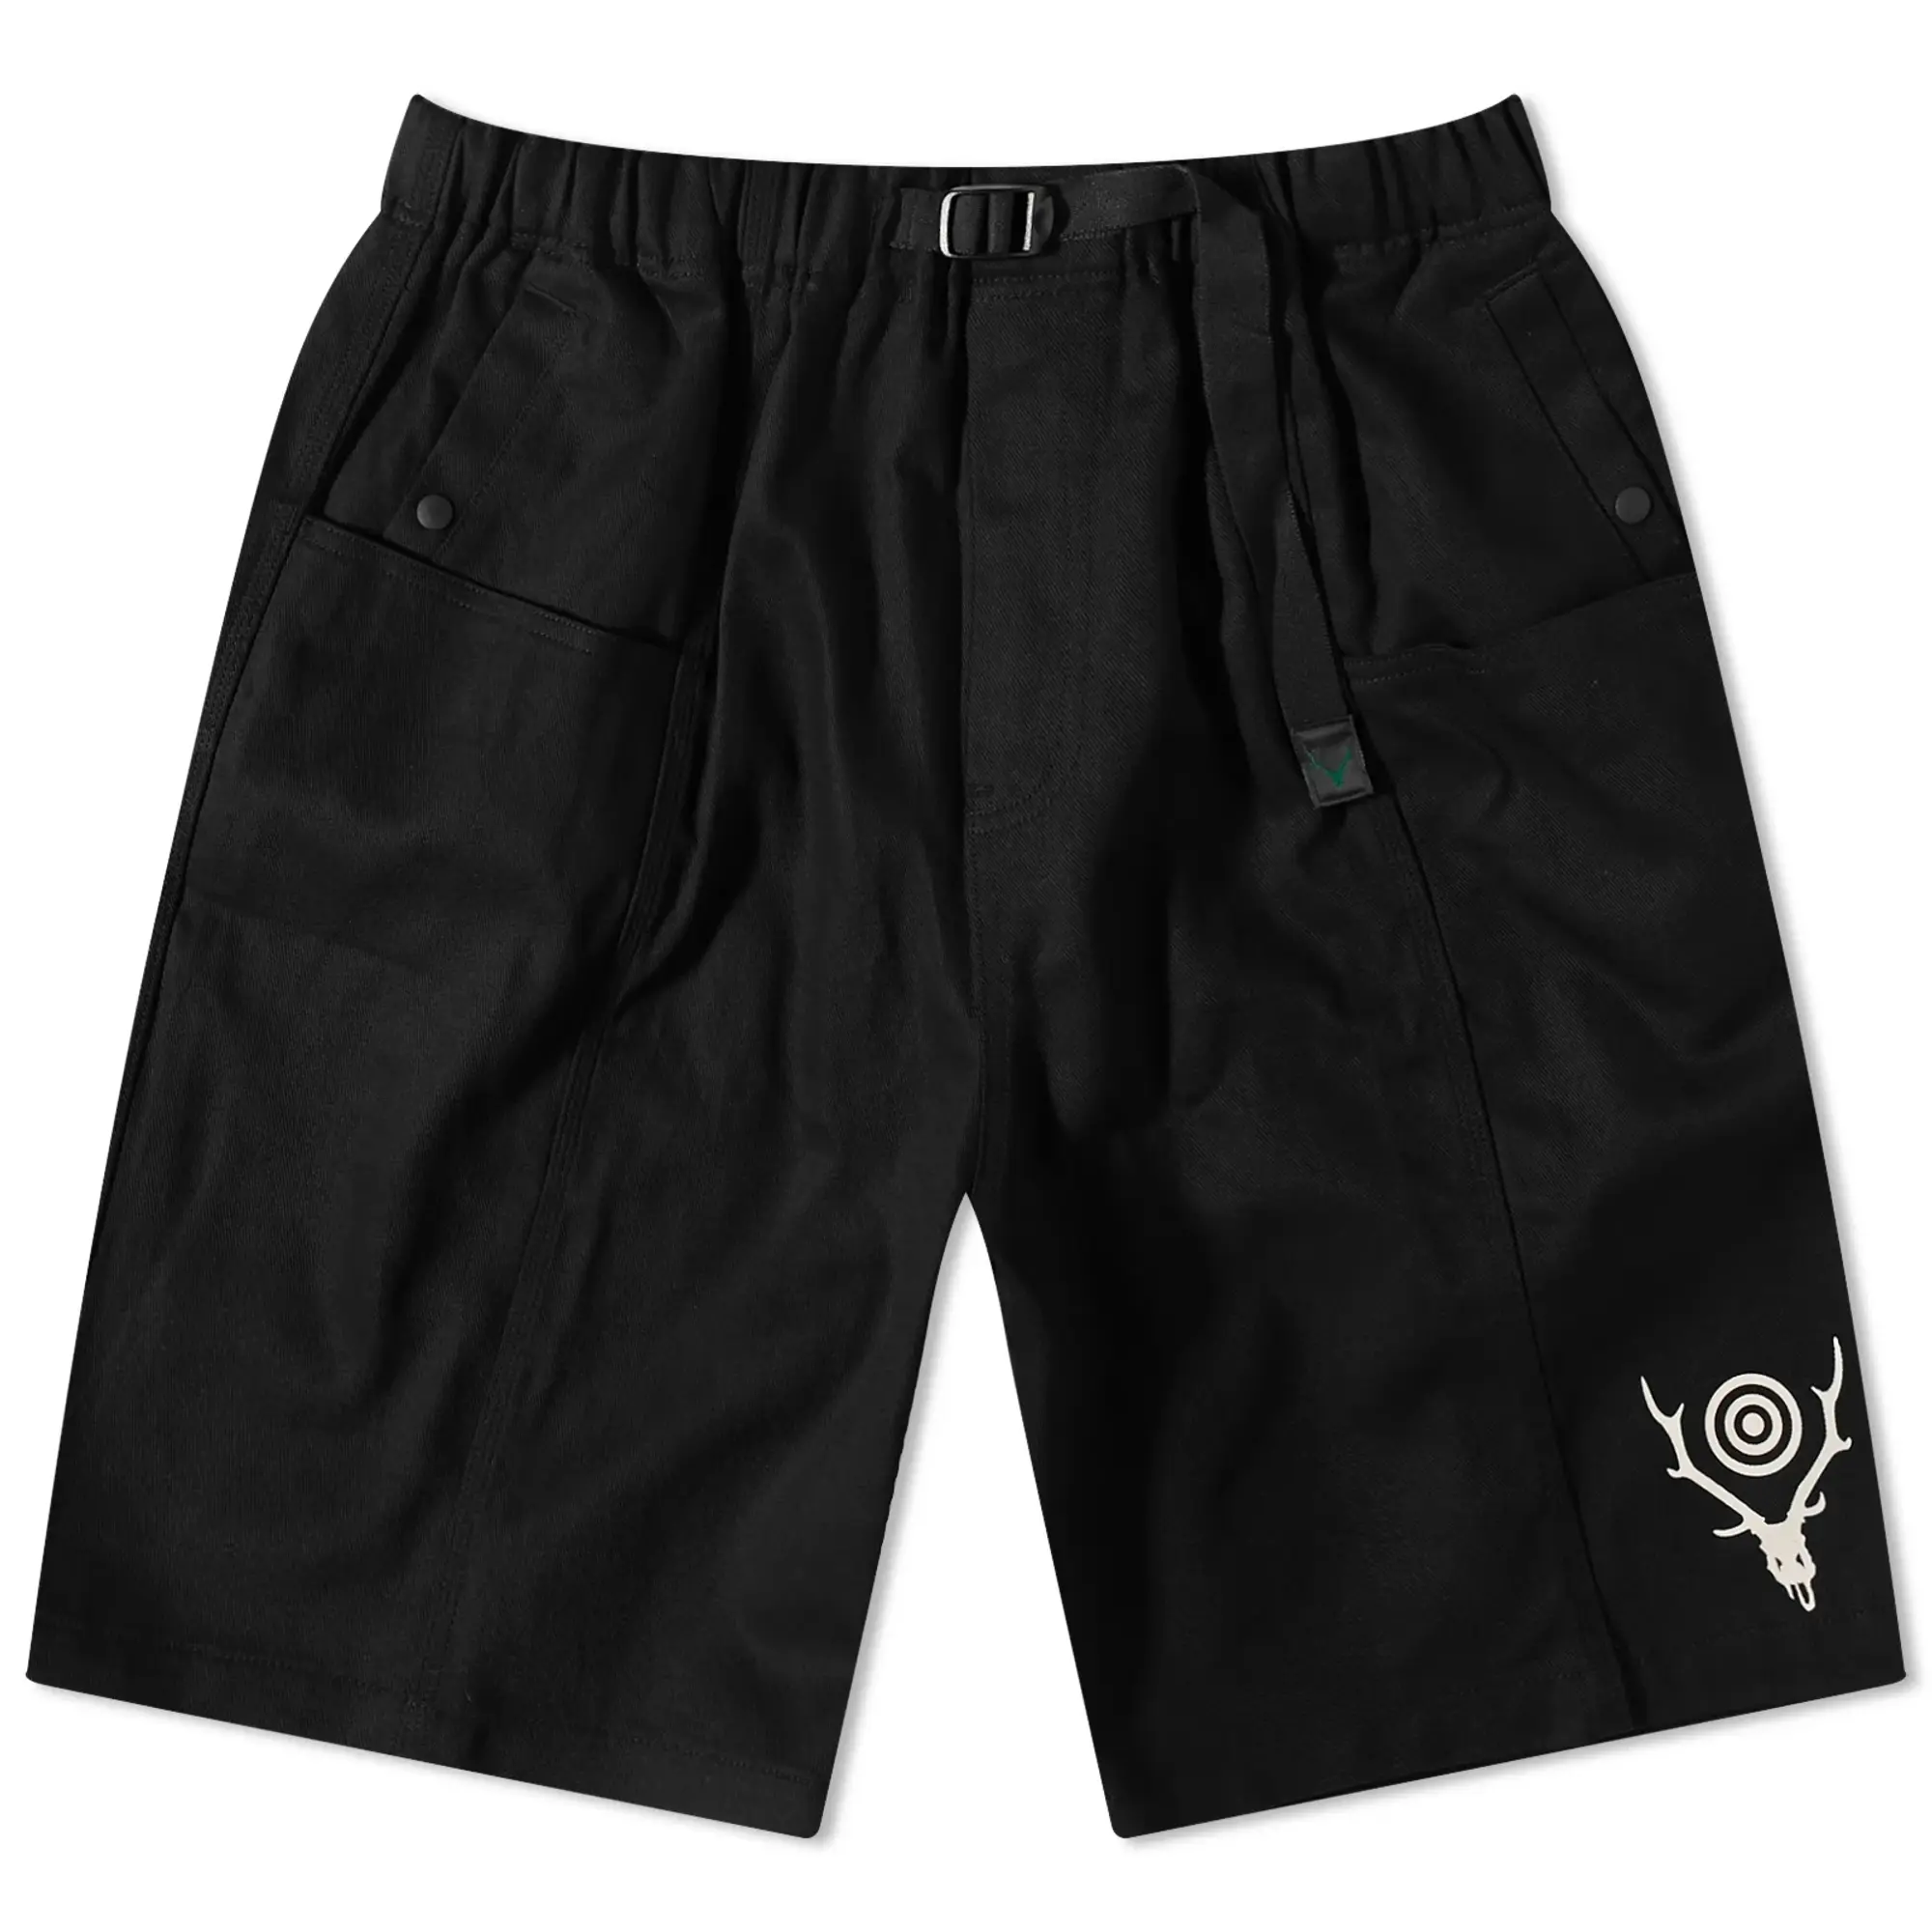 South2 West8  Men'sBelted C.S. Twill Shorts Black